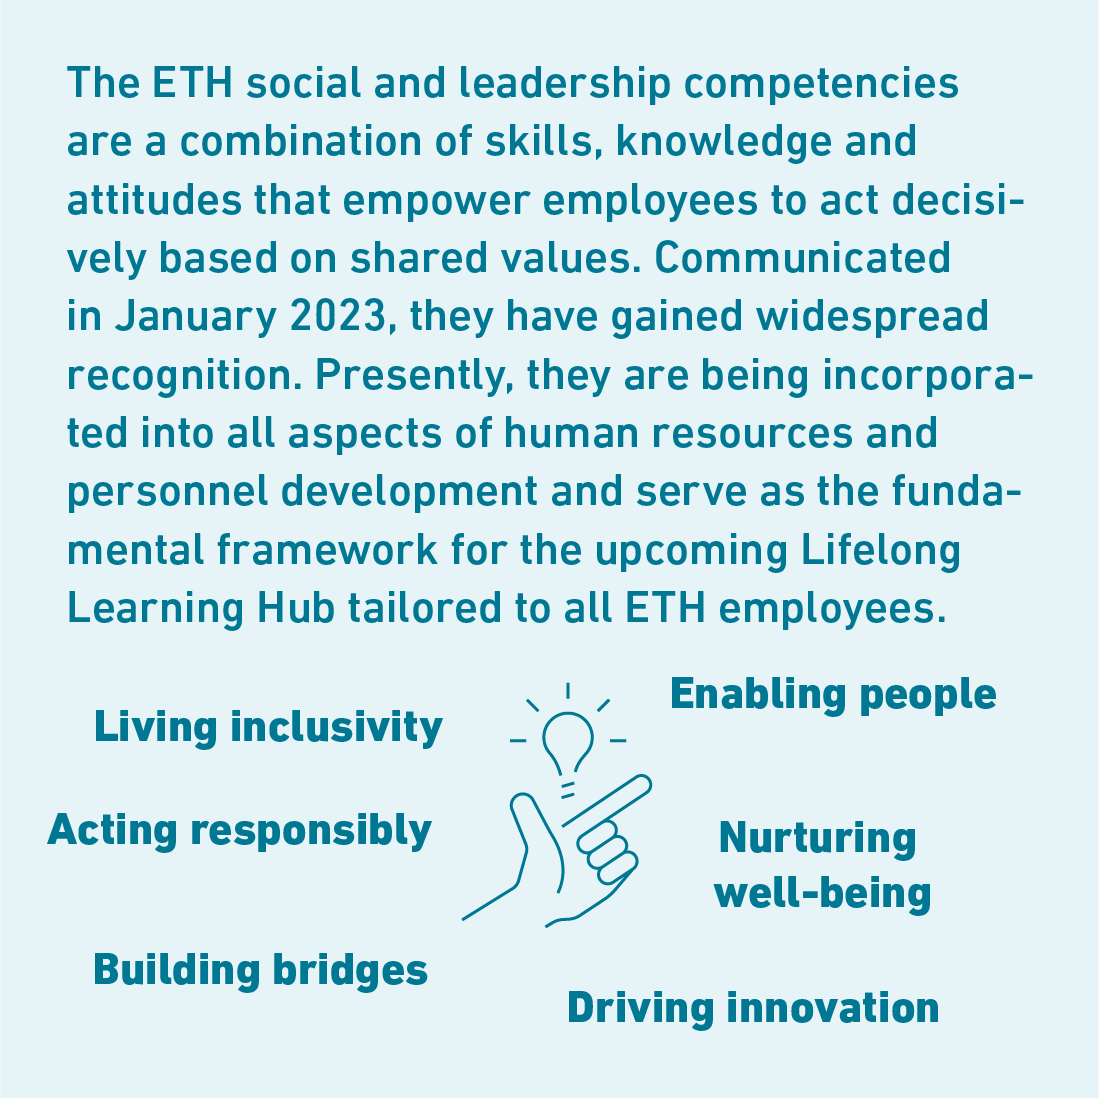 The ETH social and leadership competencies are a combination of skills, knowledge and attitudes that empower employees to act decisively based on shared values. Communicated in January twenty twenty-three, they have gained significant recognition. Presently, they are being incorporated into all aspects of human resources and personnel development and serve as the fundamental framework for the upcoming Lifelong Learning Hub tailored for all ETH employees. The Link goes to the Value Creation Model.